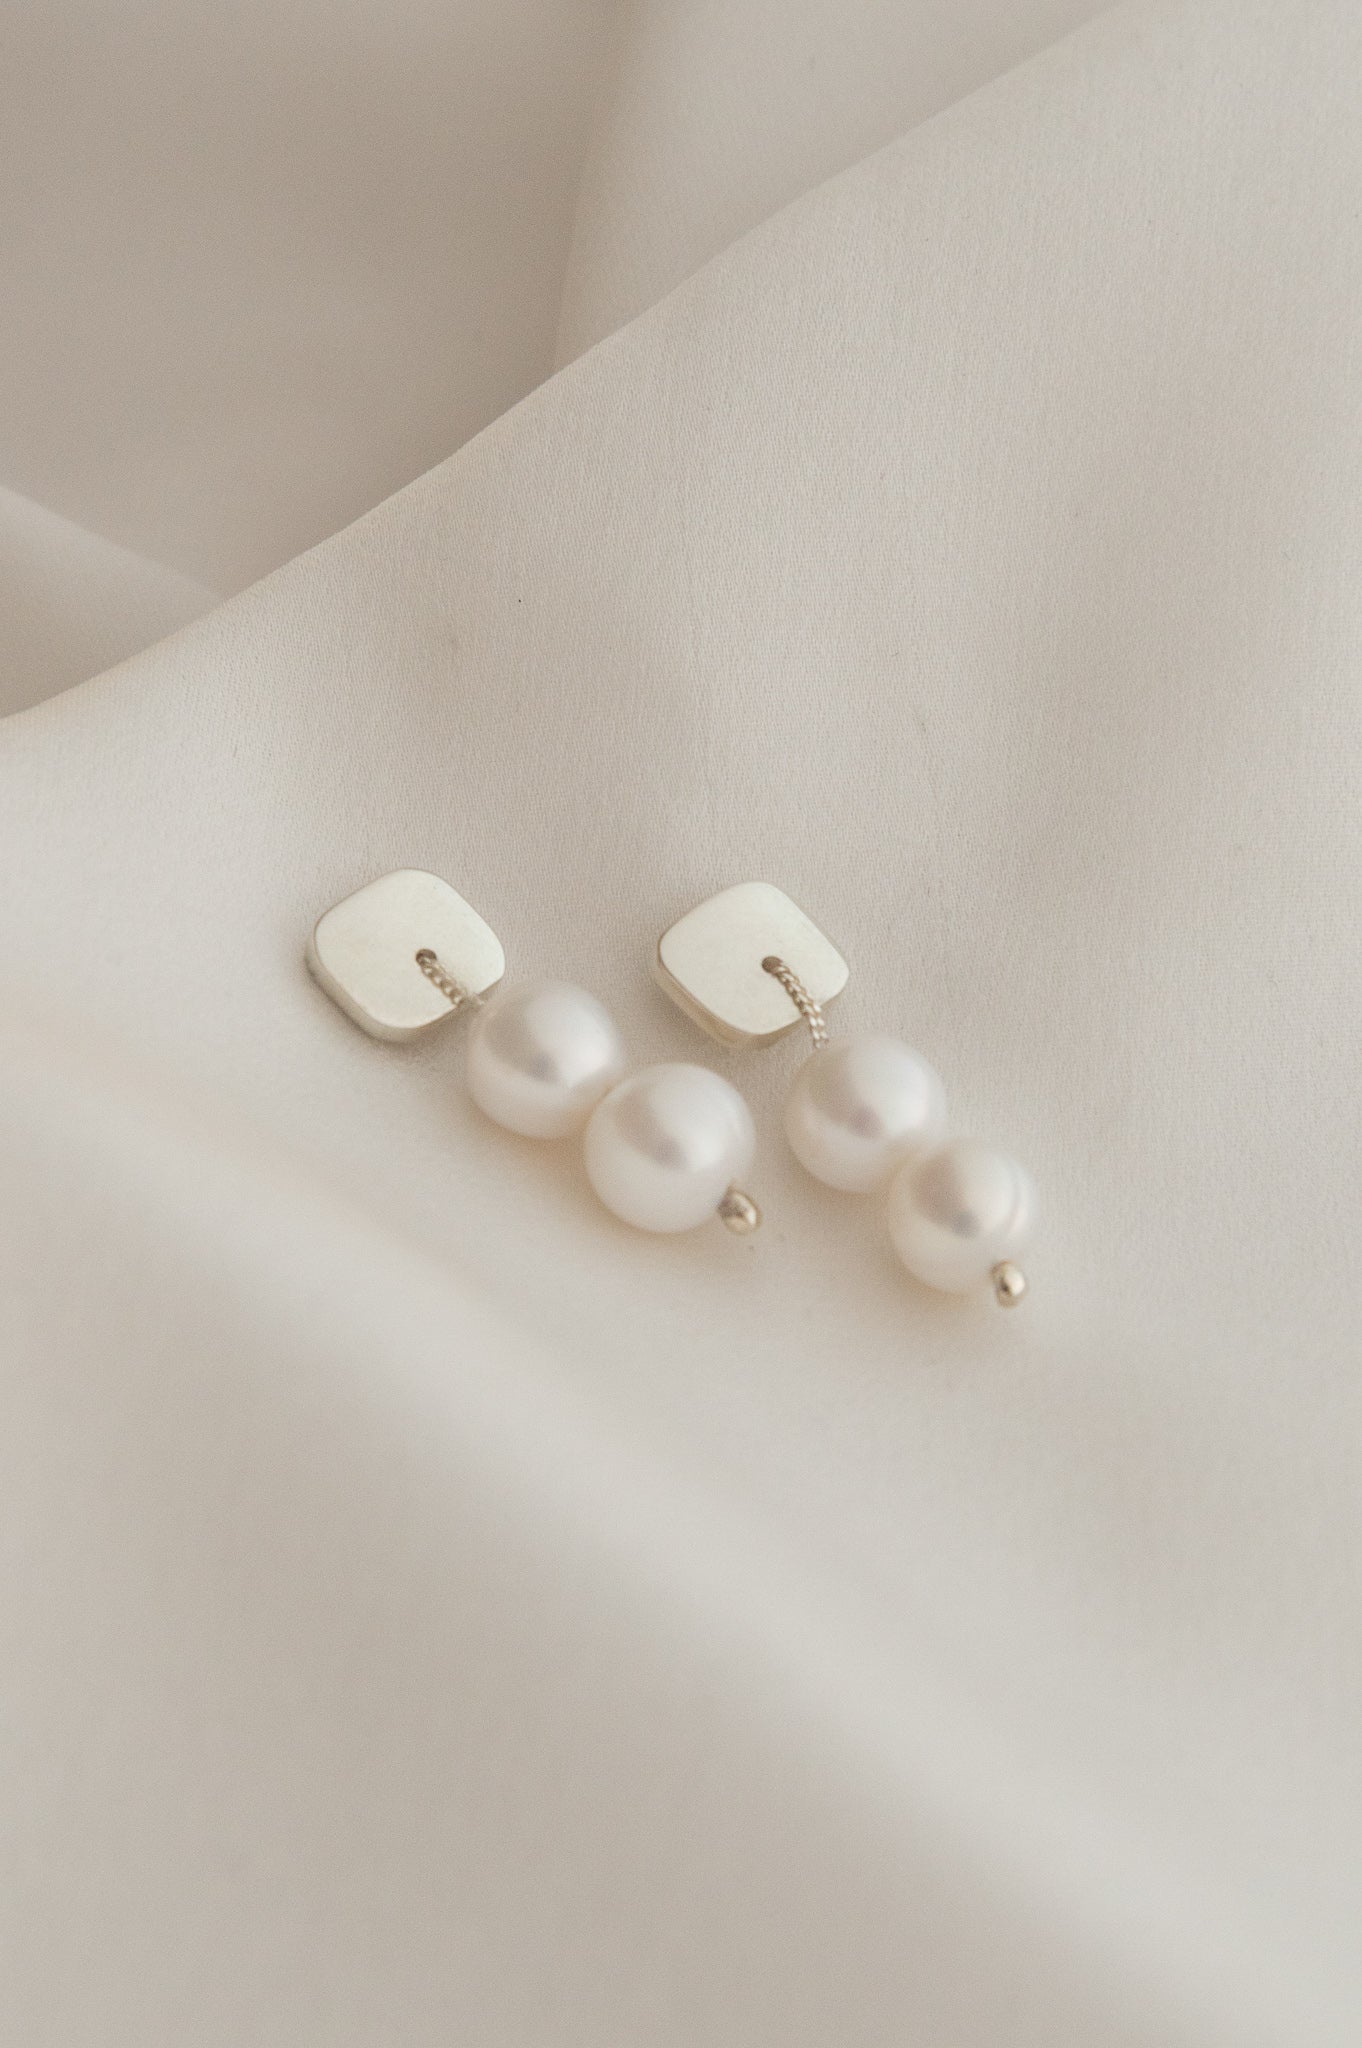 Dangling pearl earrings.  This pair features two 8mm lustrous, high-grade freshwater pearls, each strung on a durable sterling silver chain and securely connected to a sturdy sterling silver base.